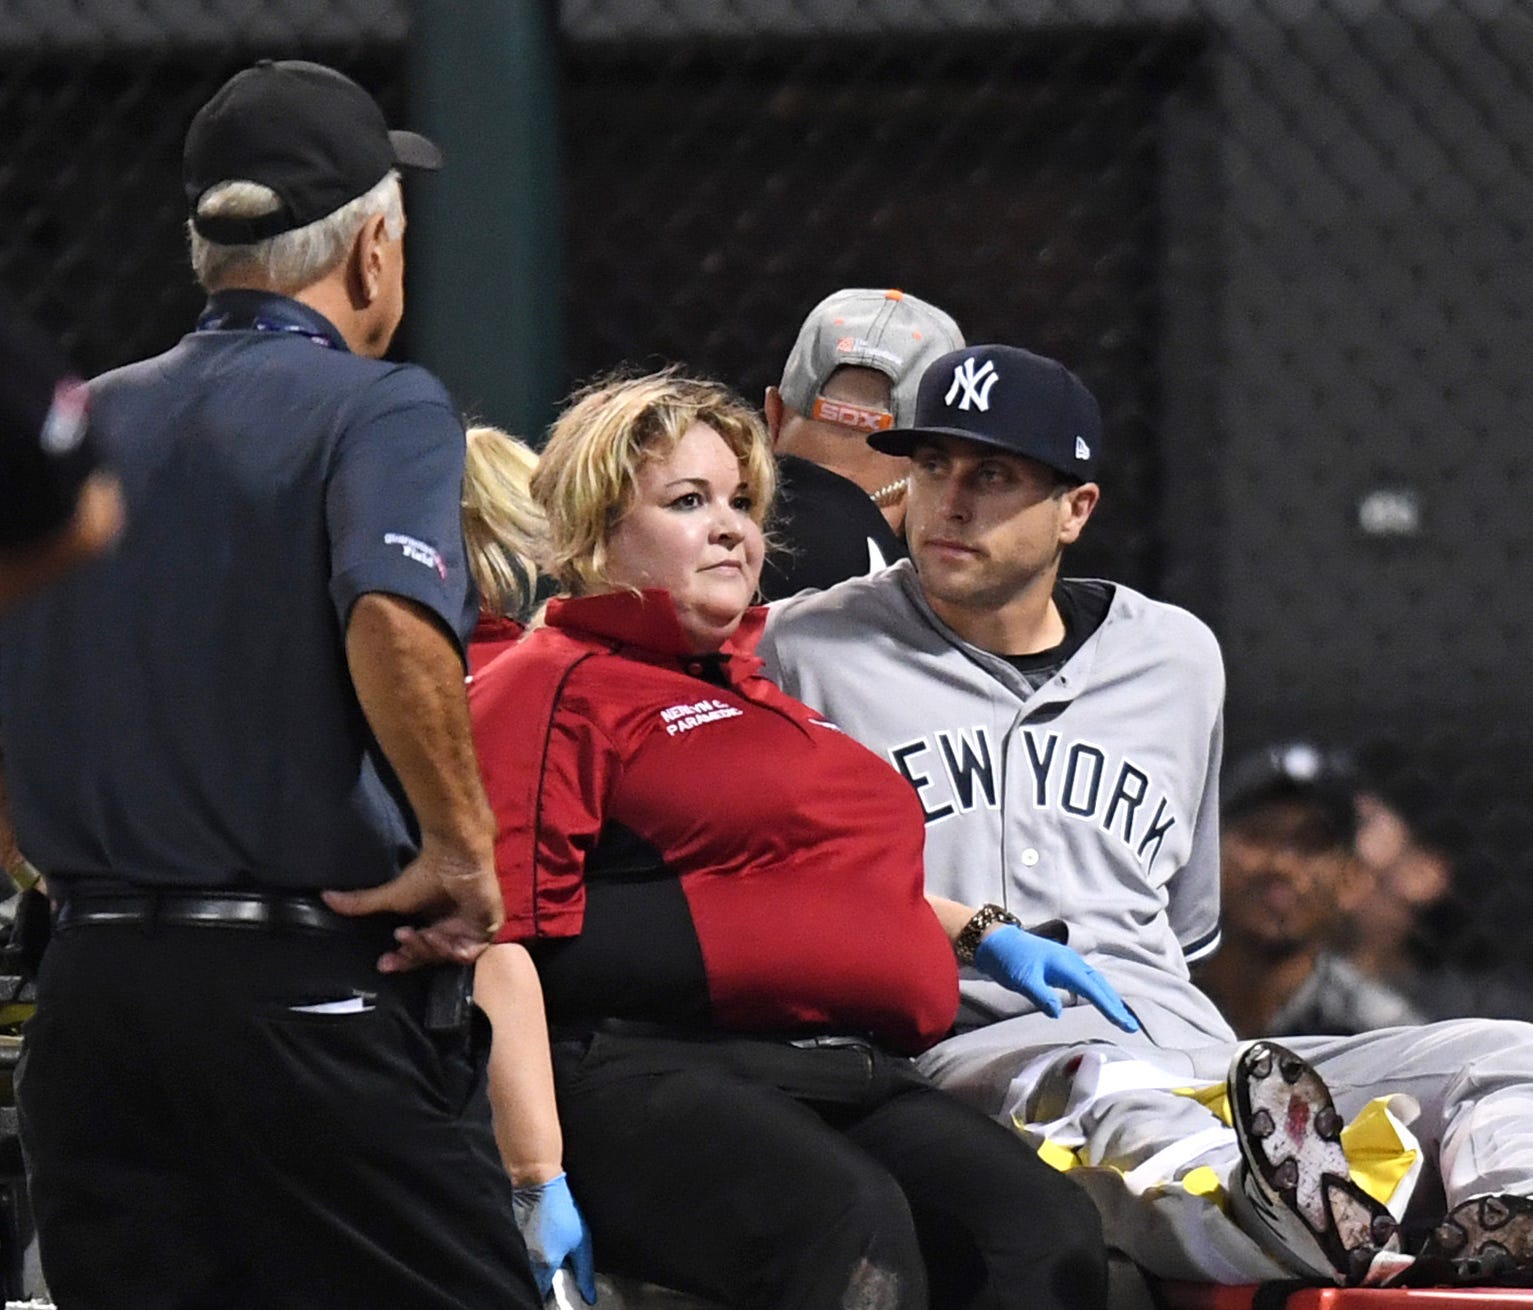 Former New York Yankees outfielder Dustin Fowler is taken off the field after colliding with the wall in the first inning against the Chicago White Sox at Guaranteed Rate Field on June 29.